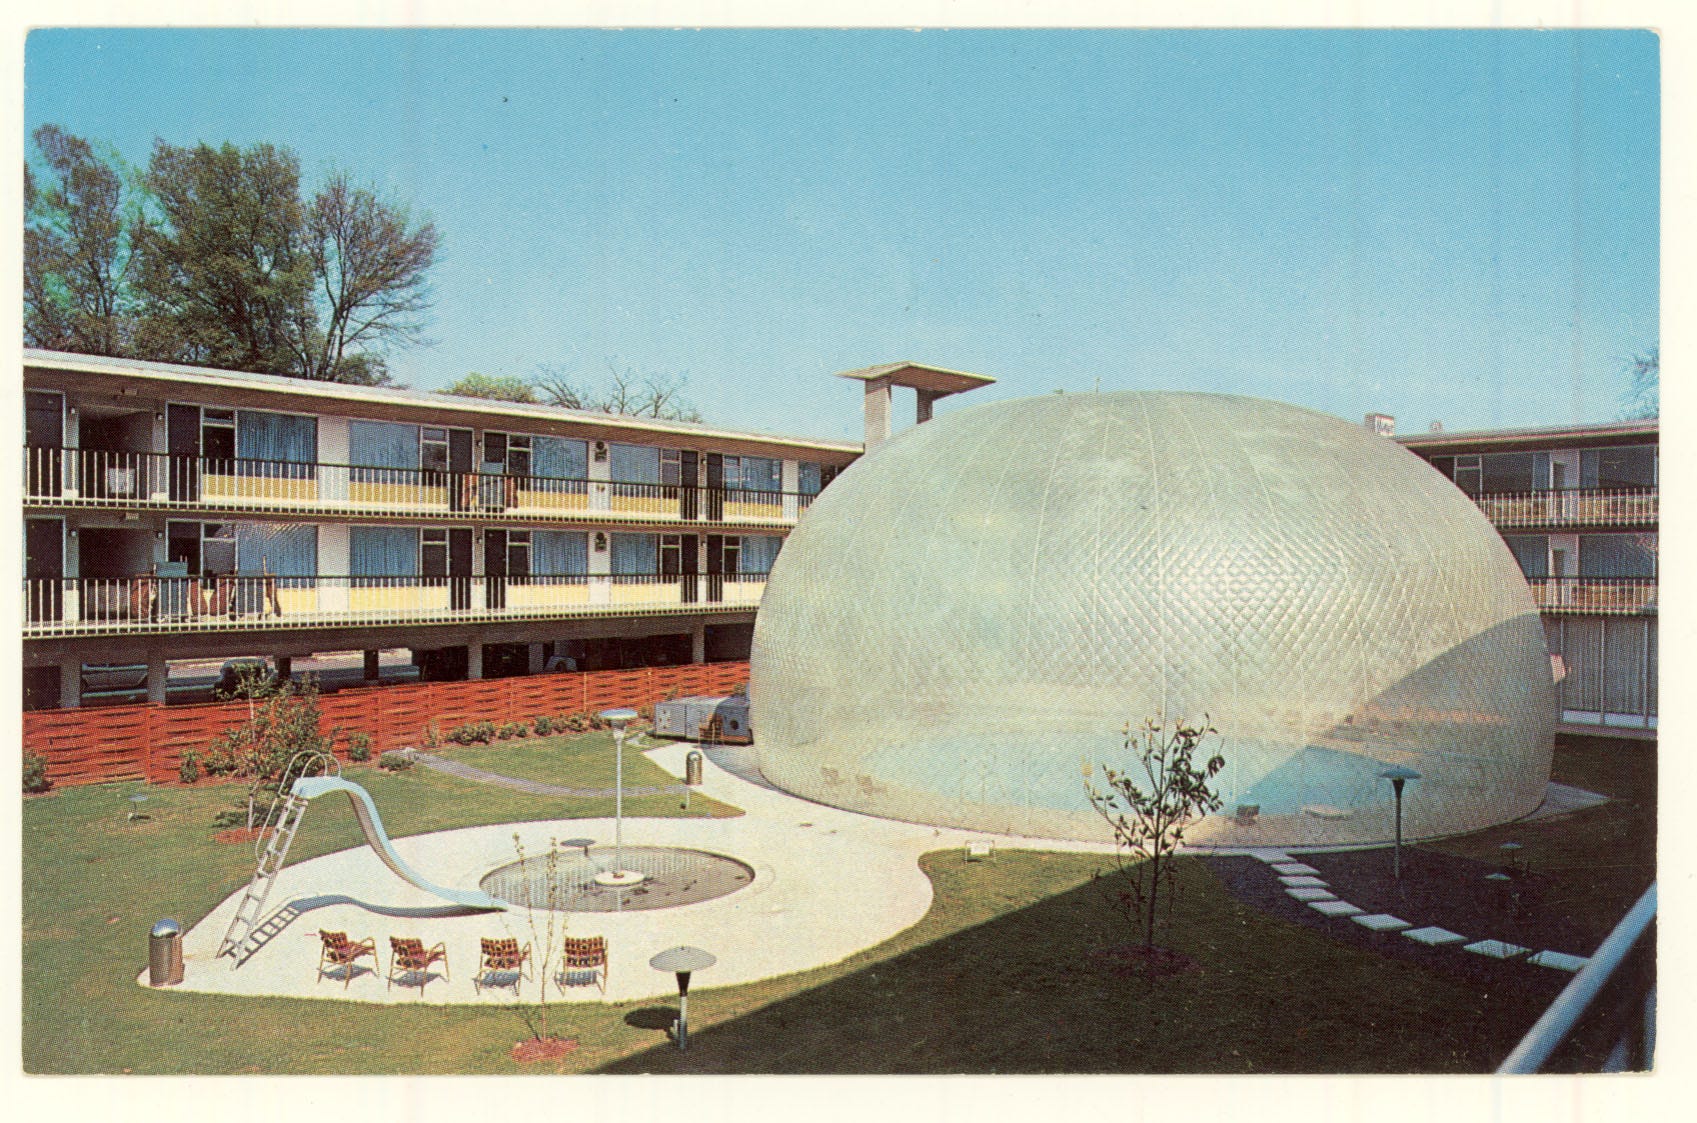 Bubble over outdoor pool at 1960s motel